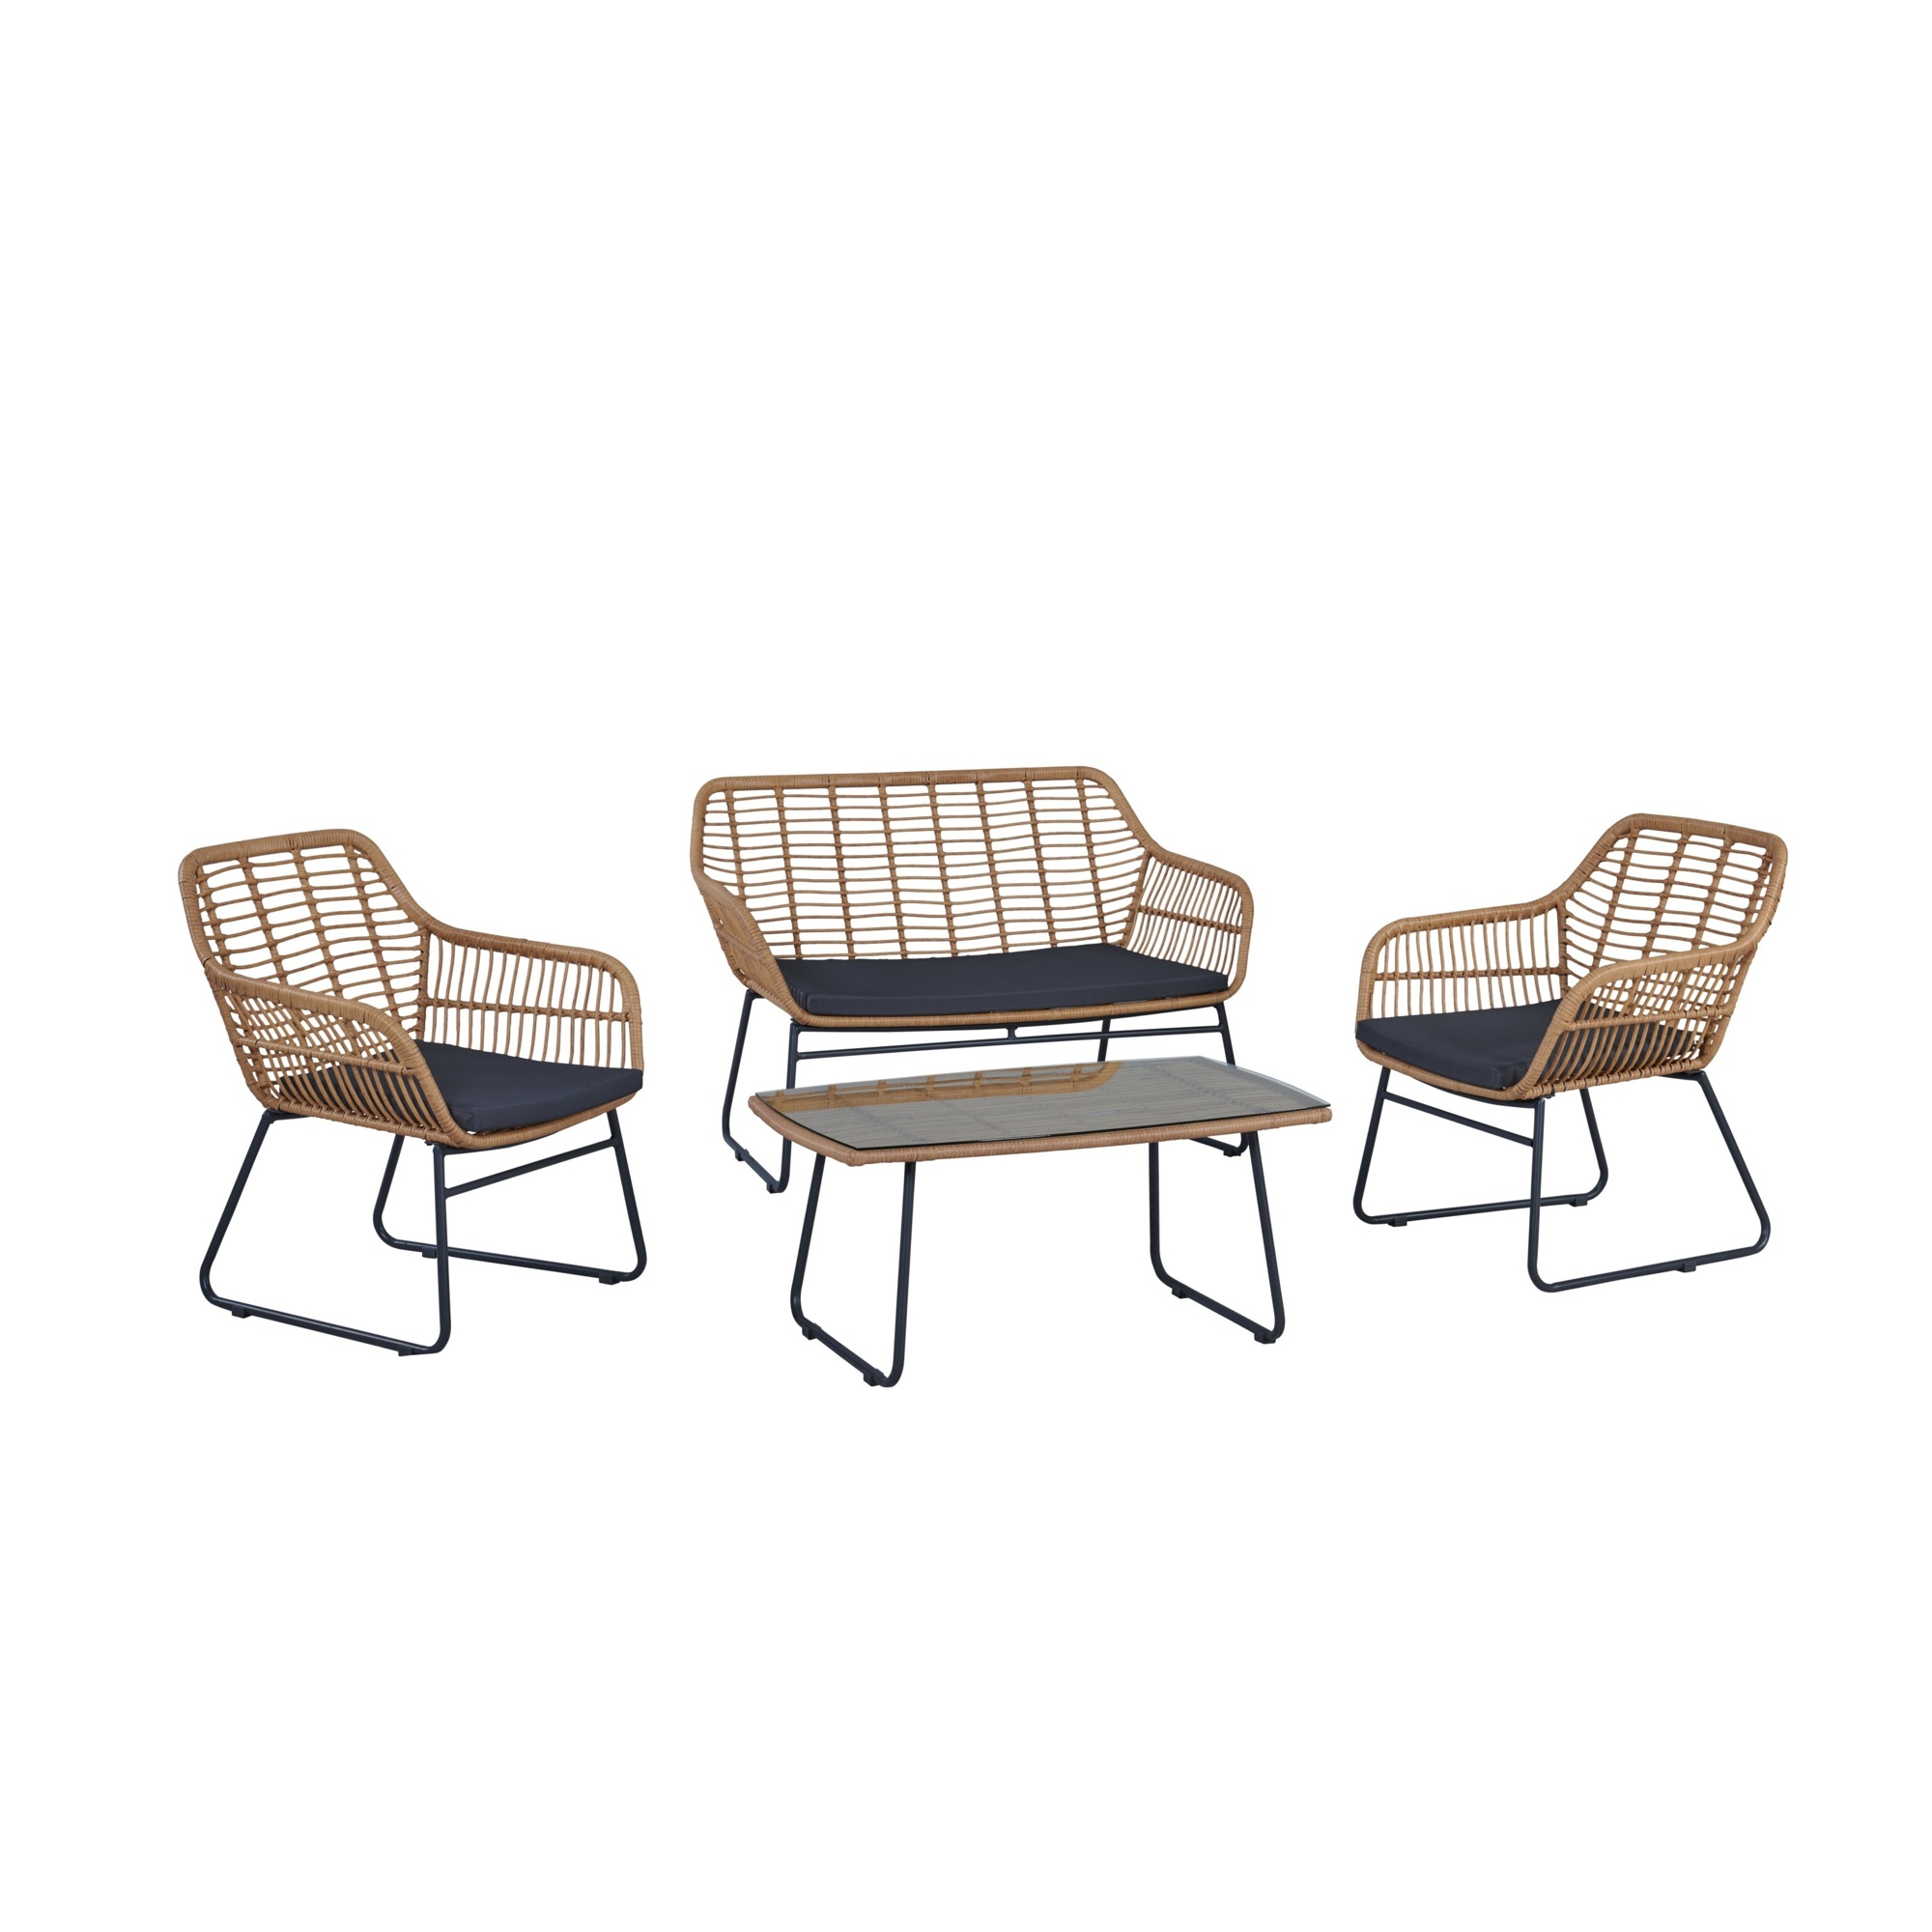 Manhattan Comfort, Antibes 2.0 Steel Rattan 4Pc Patio Conv Set Grey, Pieces (qty.) 4 Primary Color Gray, Seating Capacity 4 Model OD-CV011